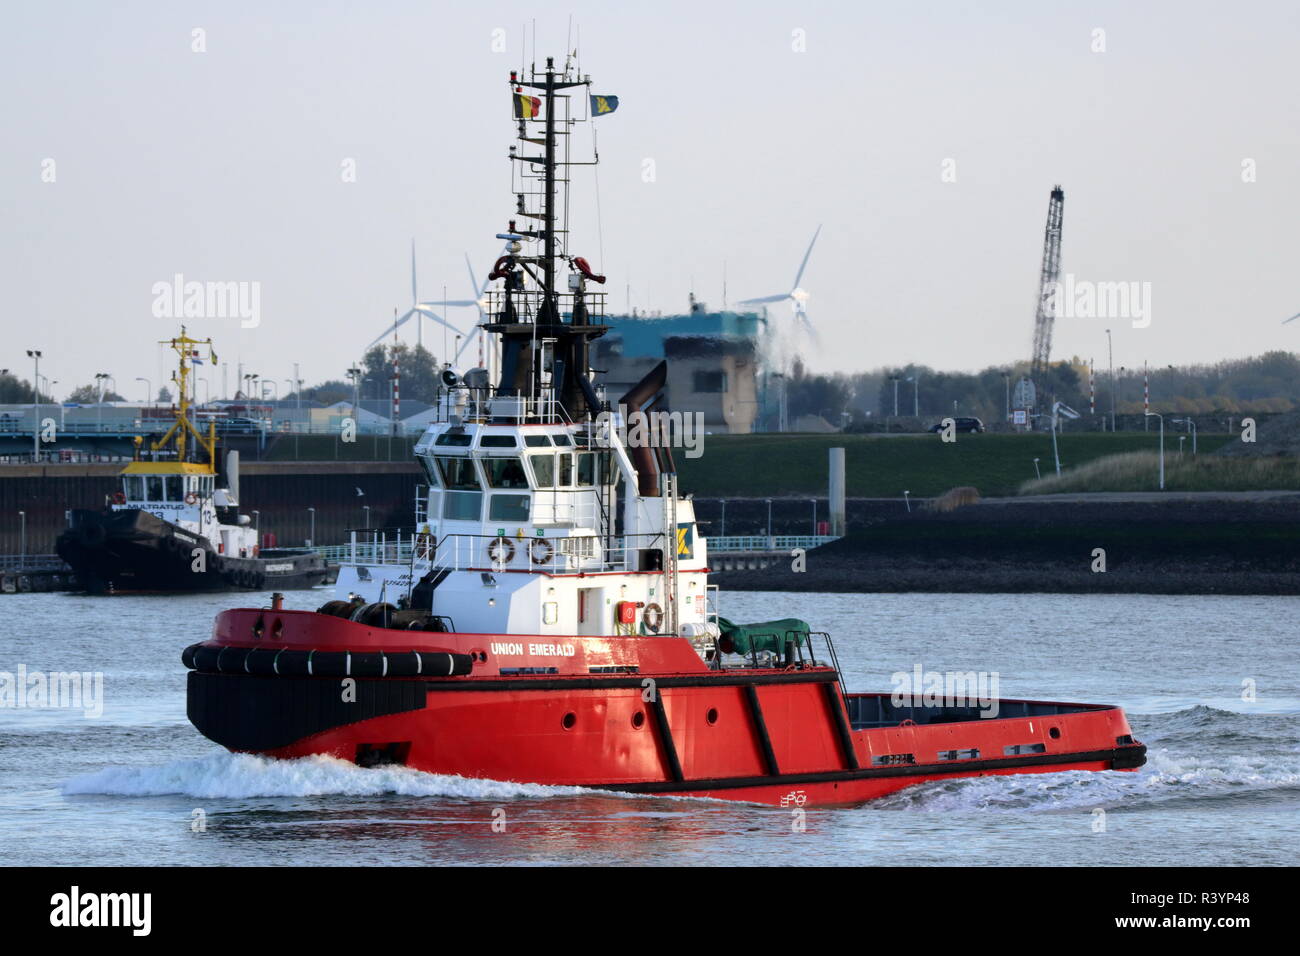 The harbor tug Union Emerald leaves Terneuzen on 19 October 2018 and heads for the North Sea. Stock Photo